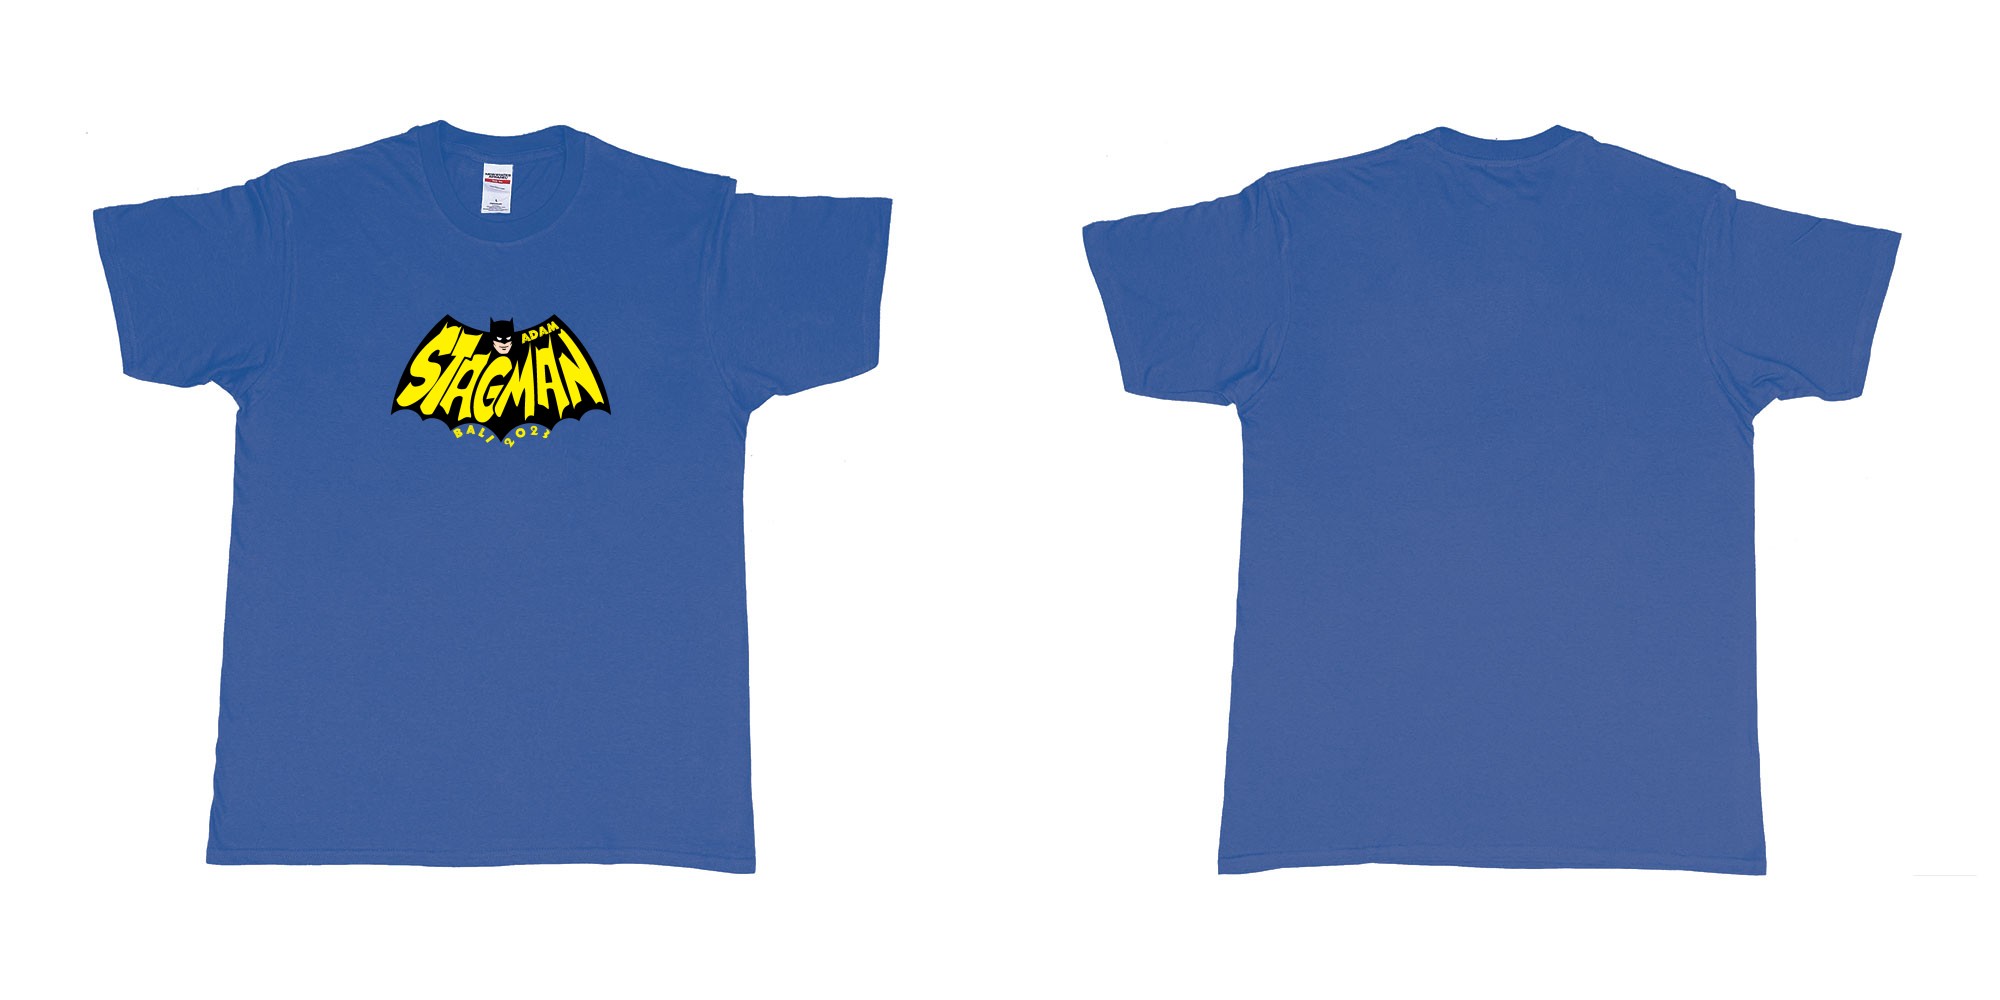 Custom tshirt design Batman StagMan Old School in fabric color royal-blue choice your own text made in Bali by The Pirate Way